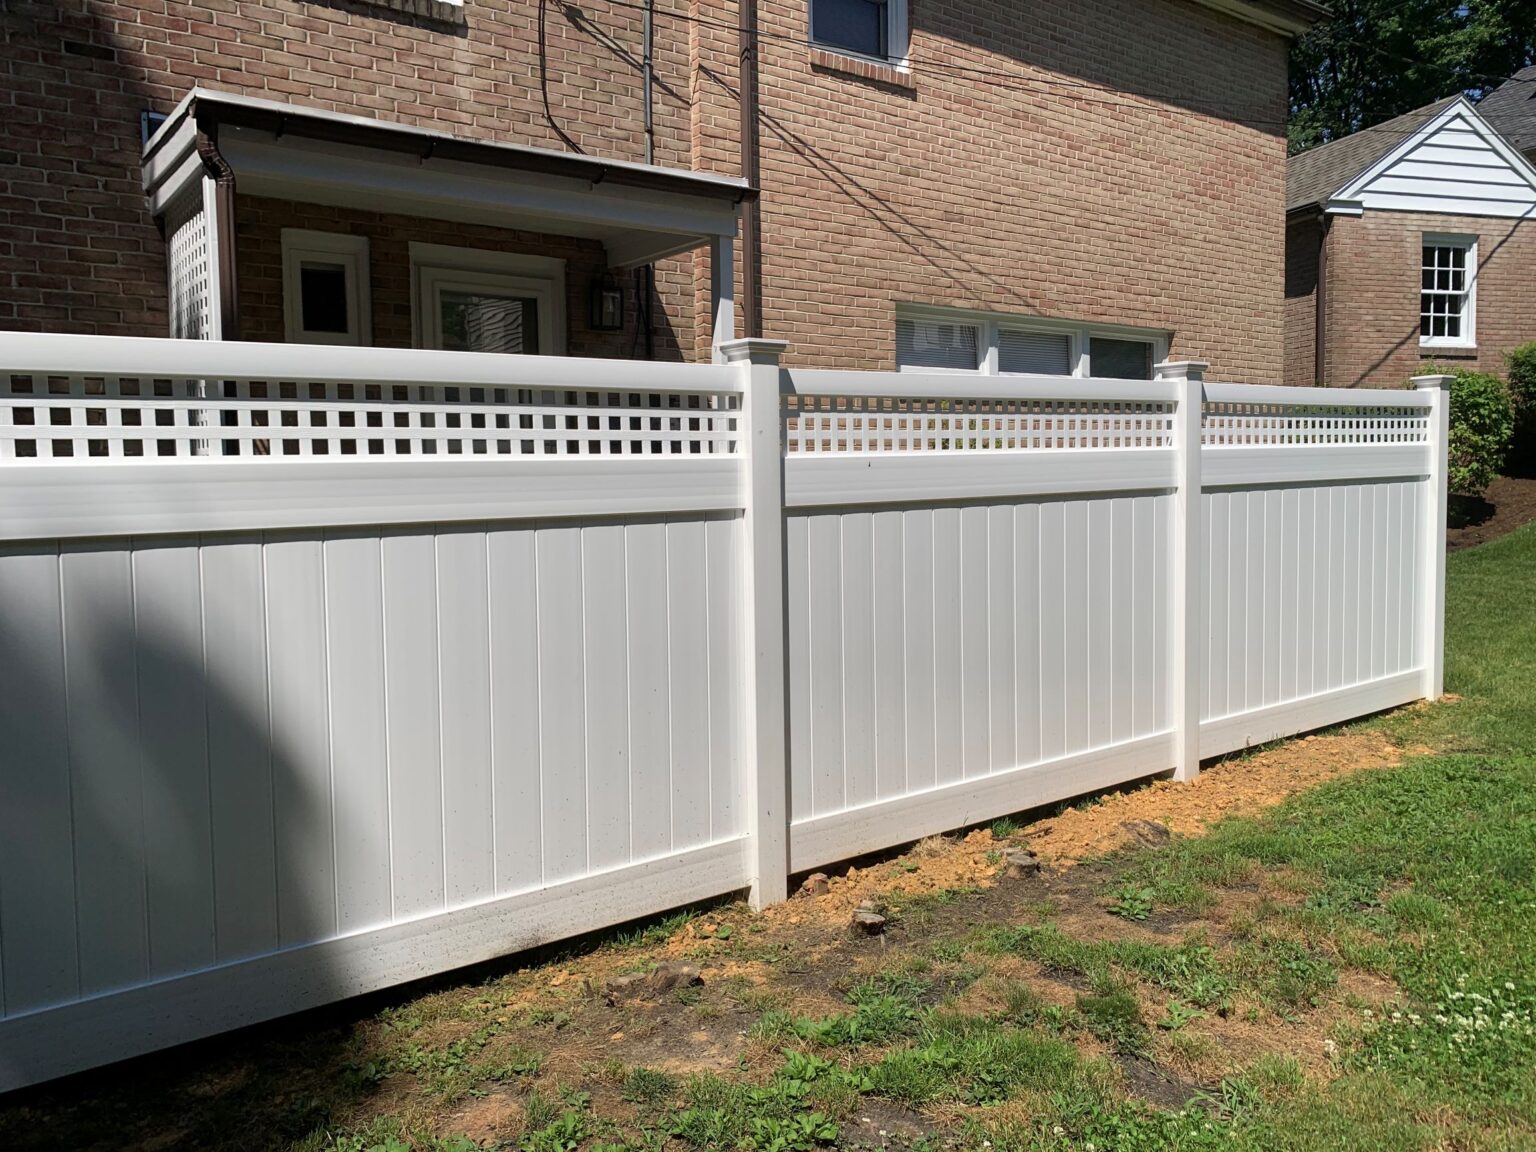 Direst Fence New Mexico White Privacy Vinyl With Square Lattice AKA The Fence Company